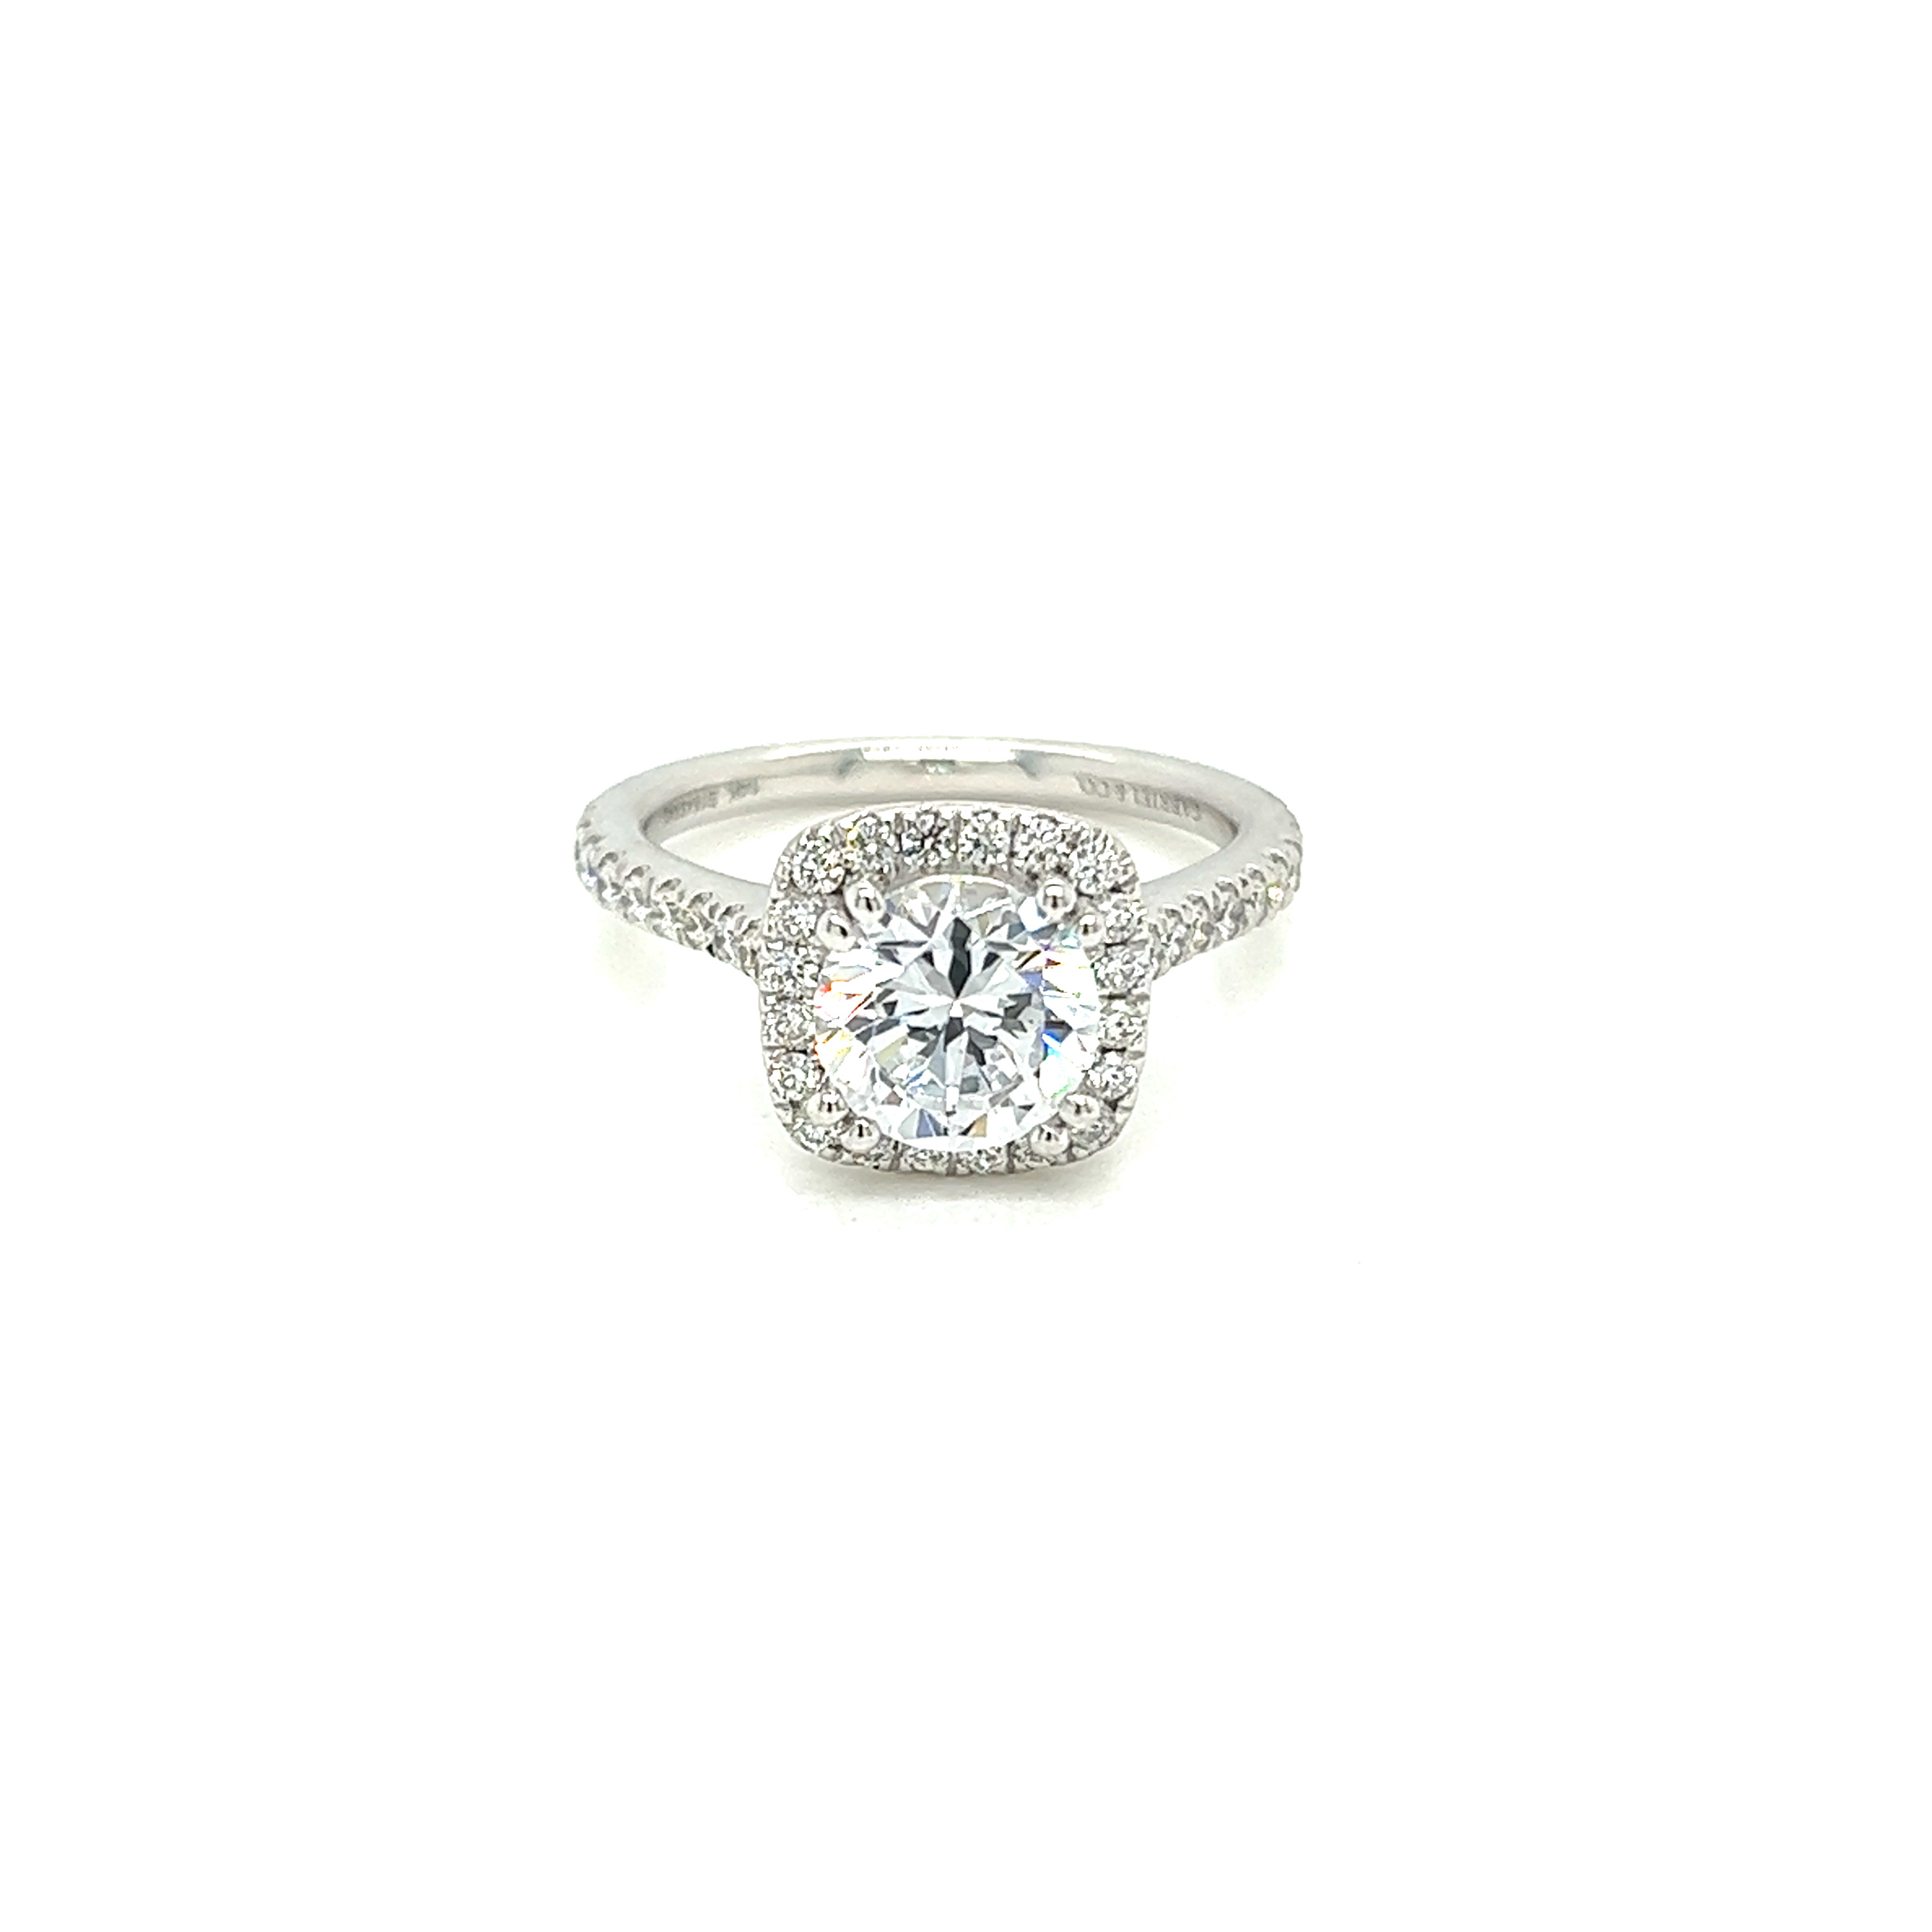 14 Karat white gold halo semi mount engagement ring Size 6.5 with 42= 0.48 total weight round brilliant G VS Diamonds